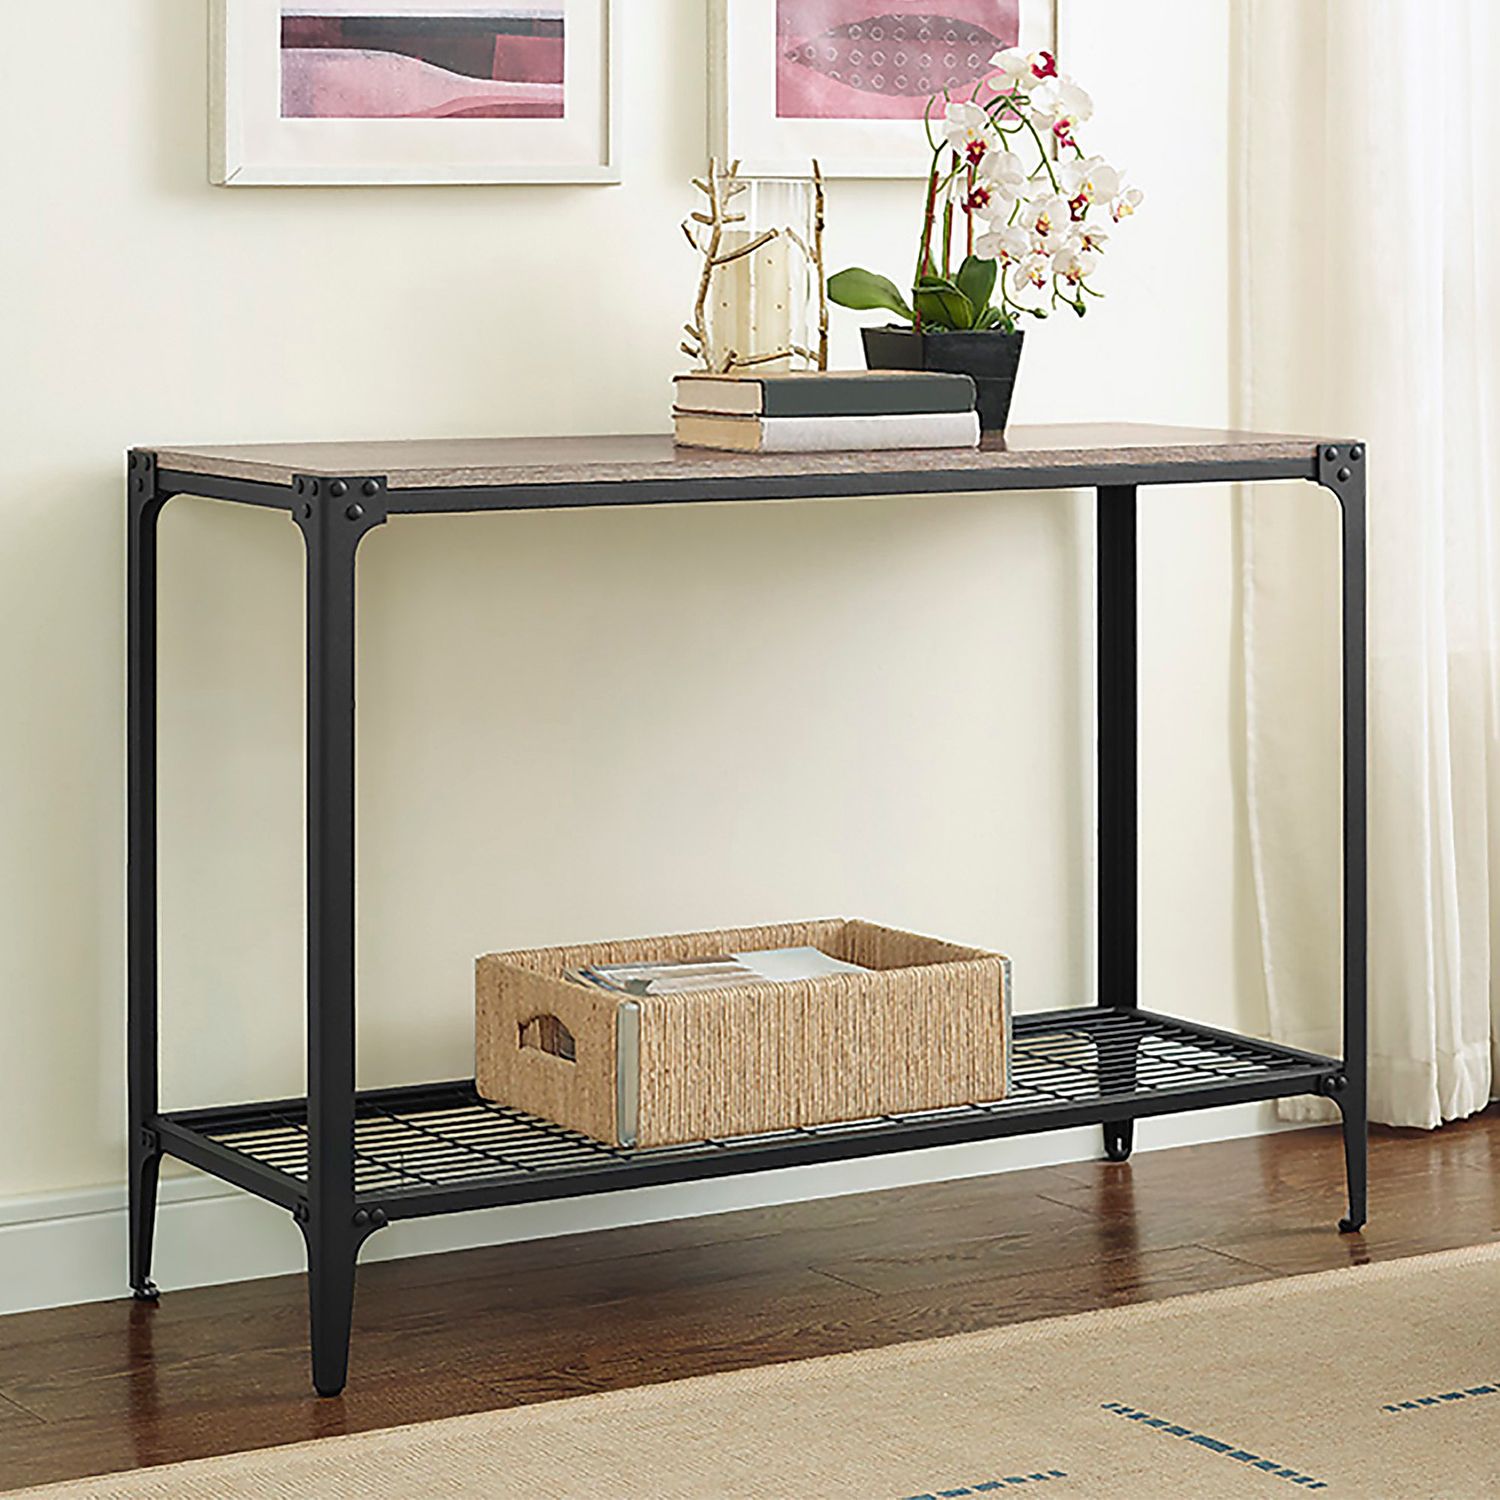 Angle Iron Rustic Console Table – Pier1 Imports With Rustic Oak And Black Console Tables (Photo 15 of 20)